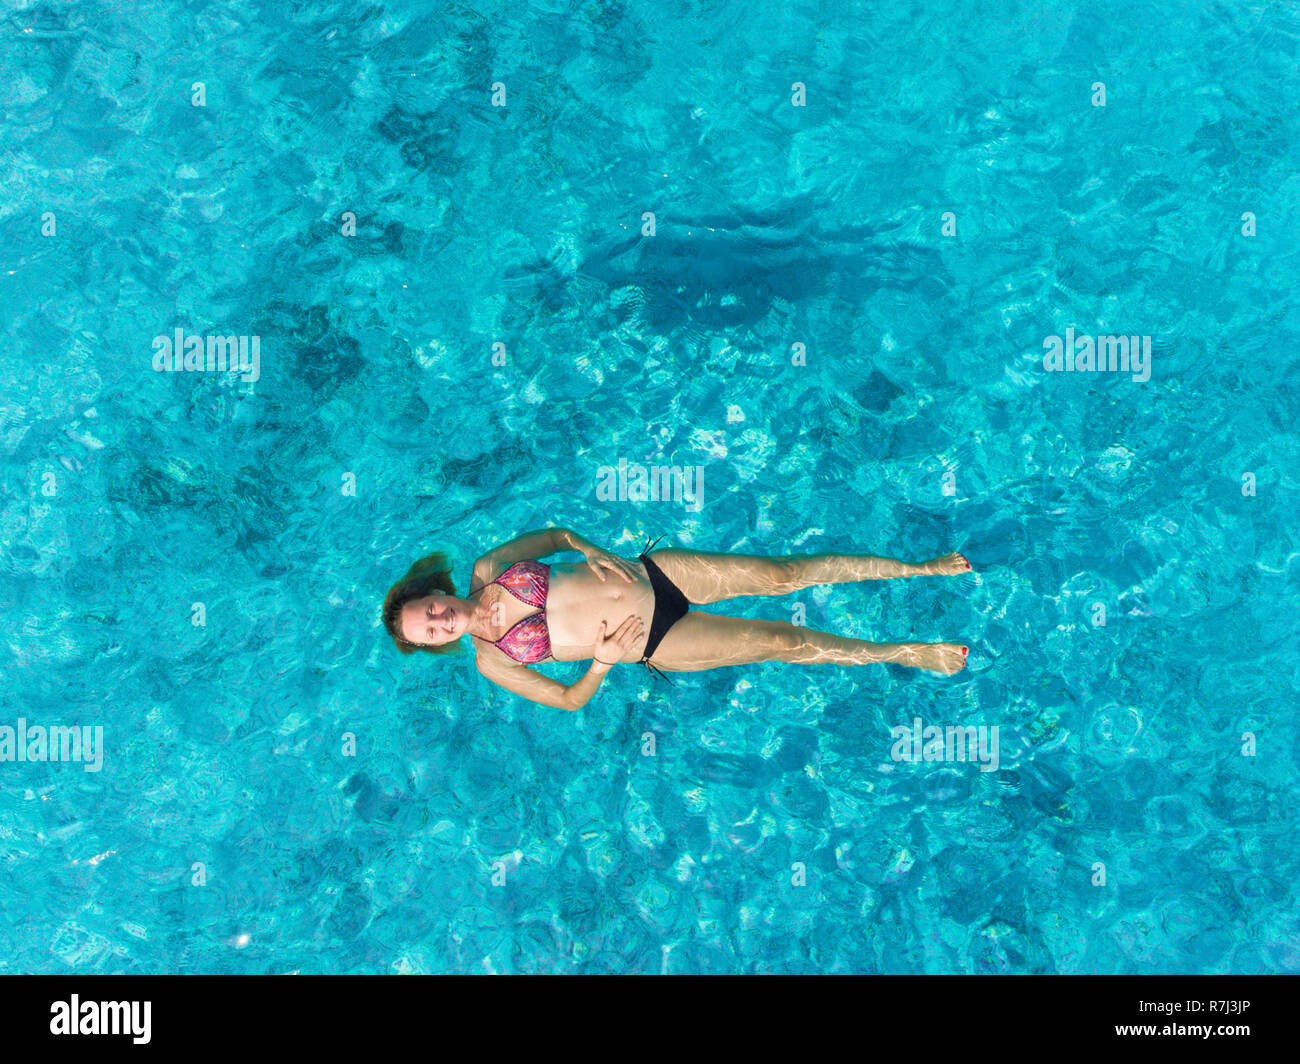 Aerial view of pregnant woman floating on her back in transparent sea holding her tummy. Stock Photo